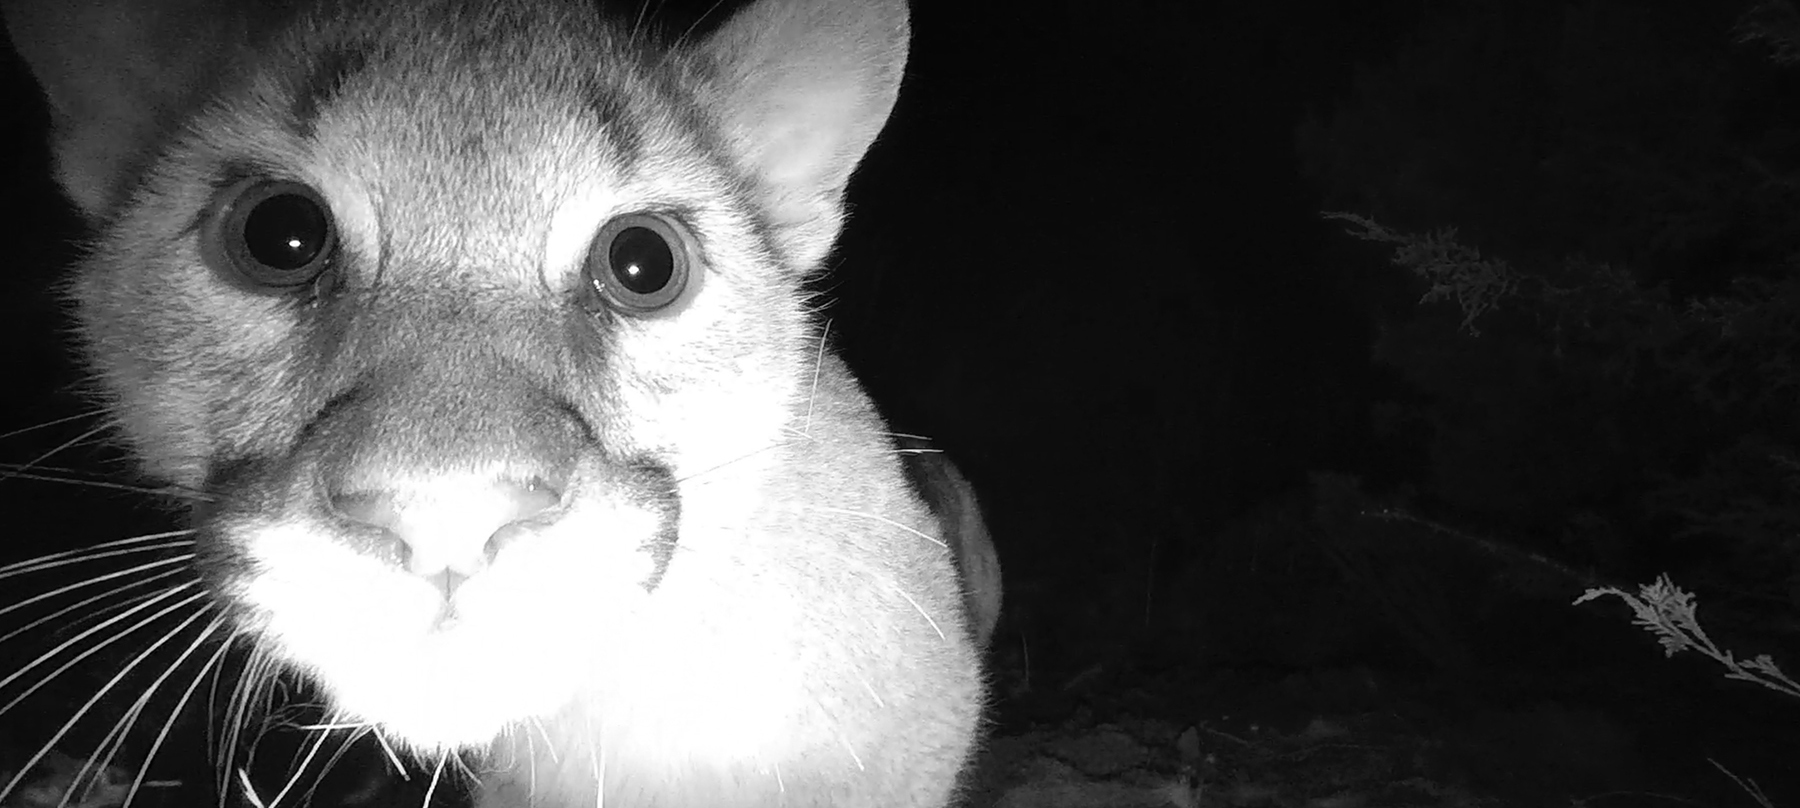 Mountain Lion Kittens First Camera Featured